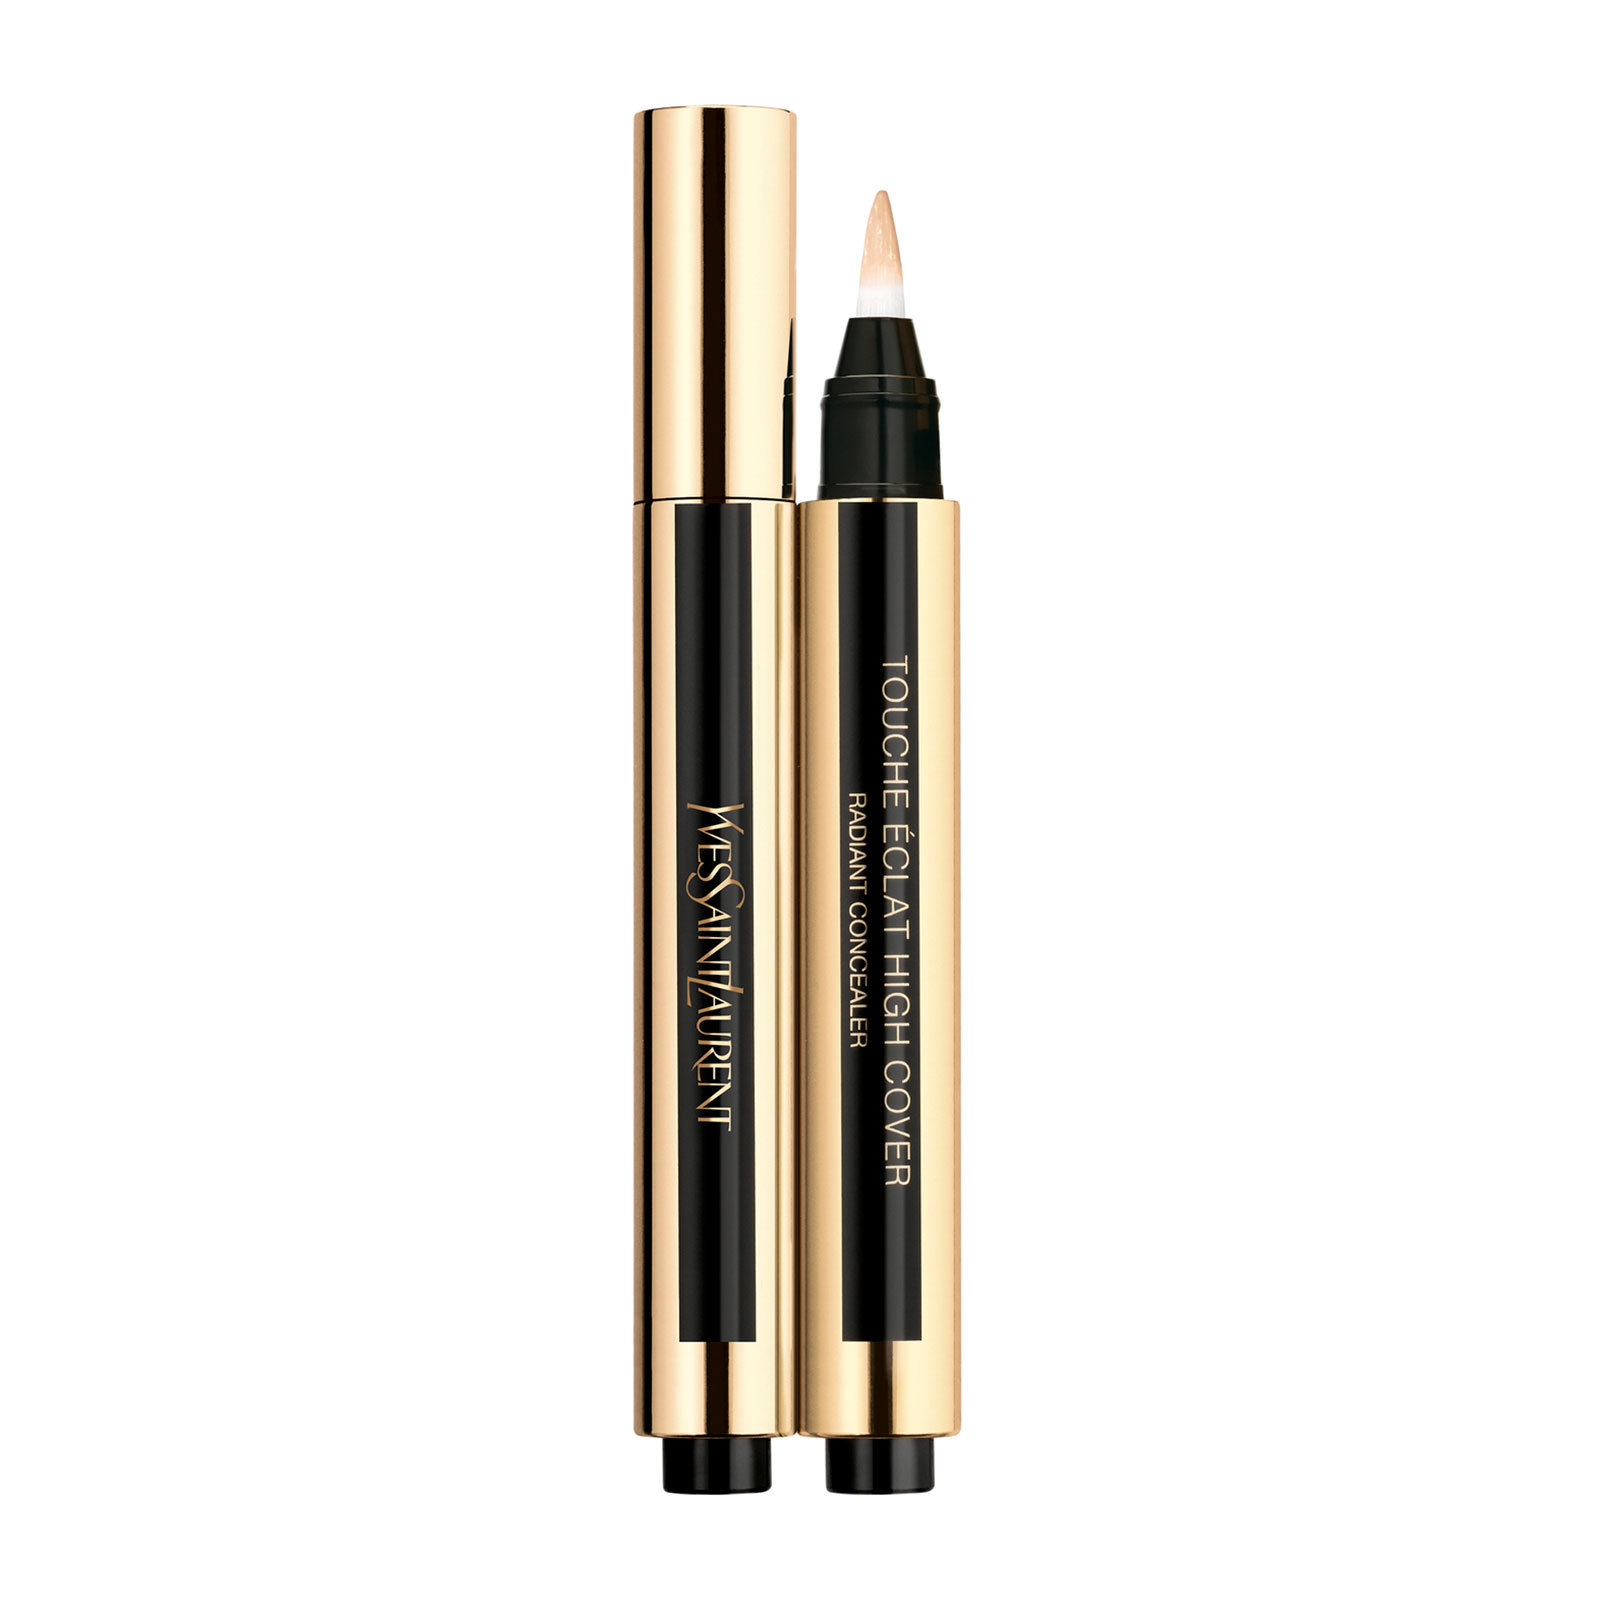 Ysl Beauty Touche Eclat High Cover Concealer 2.5Ml 1.5 Beige